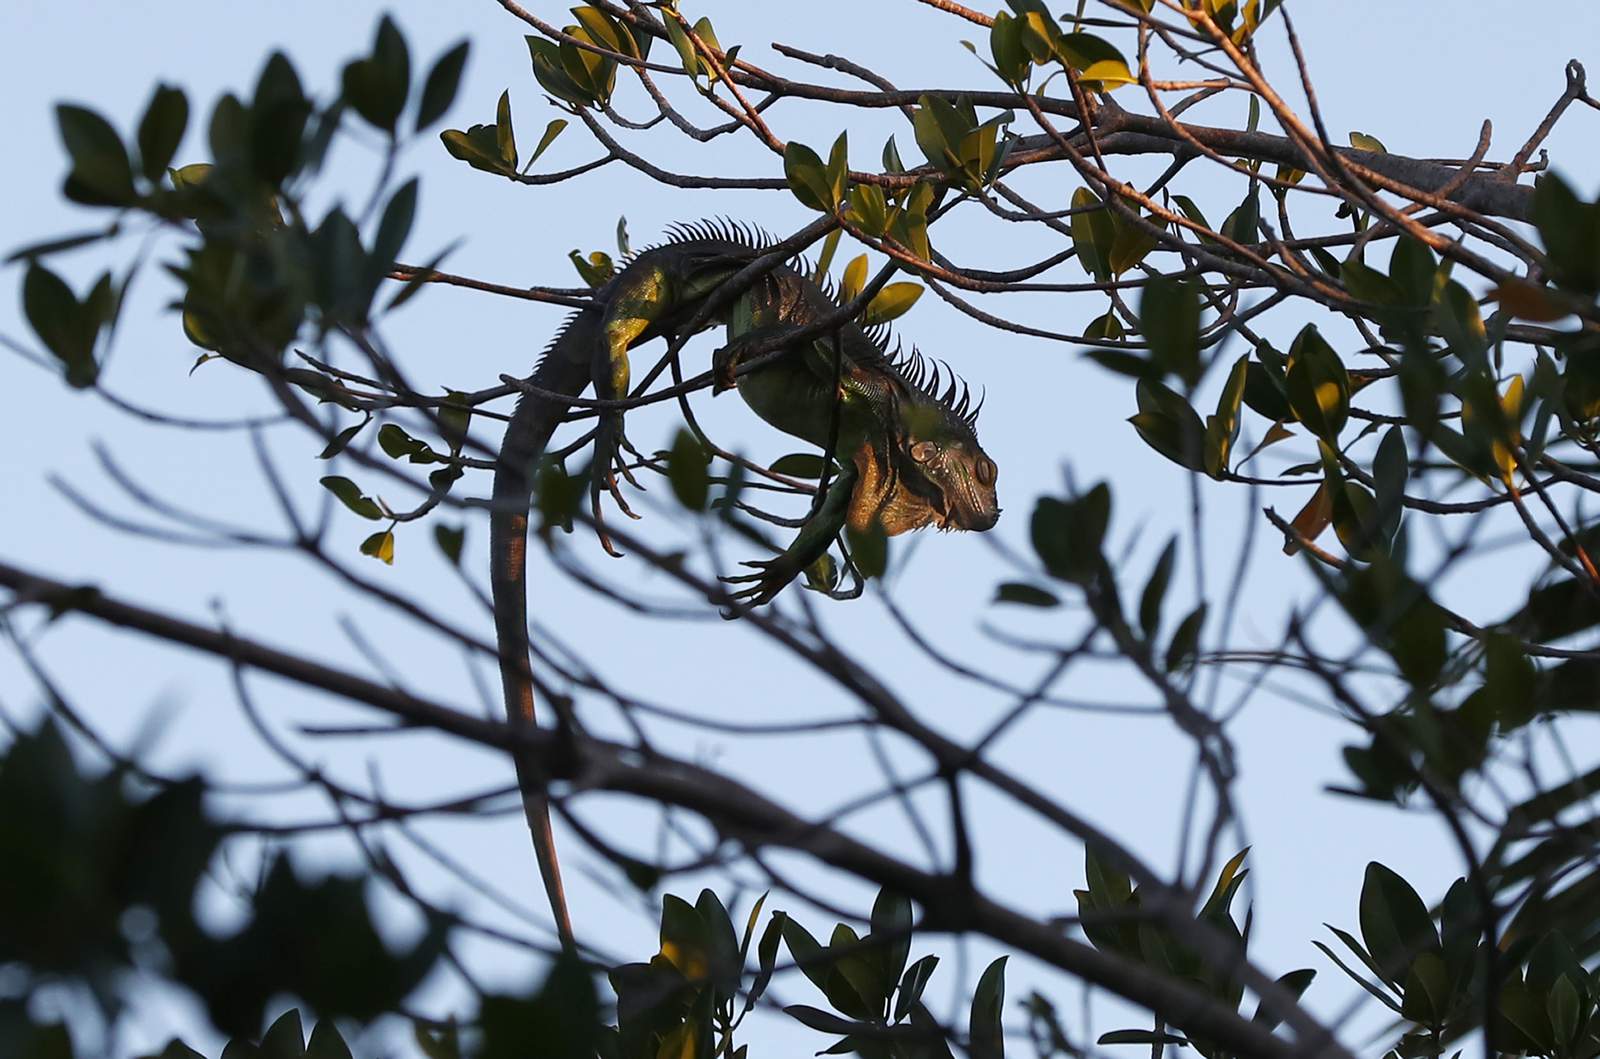 Cold-stunned iguanas falling from Florida trees